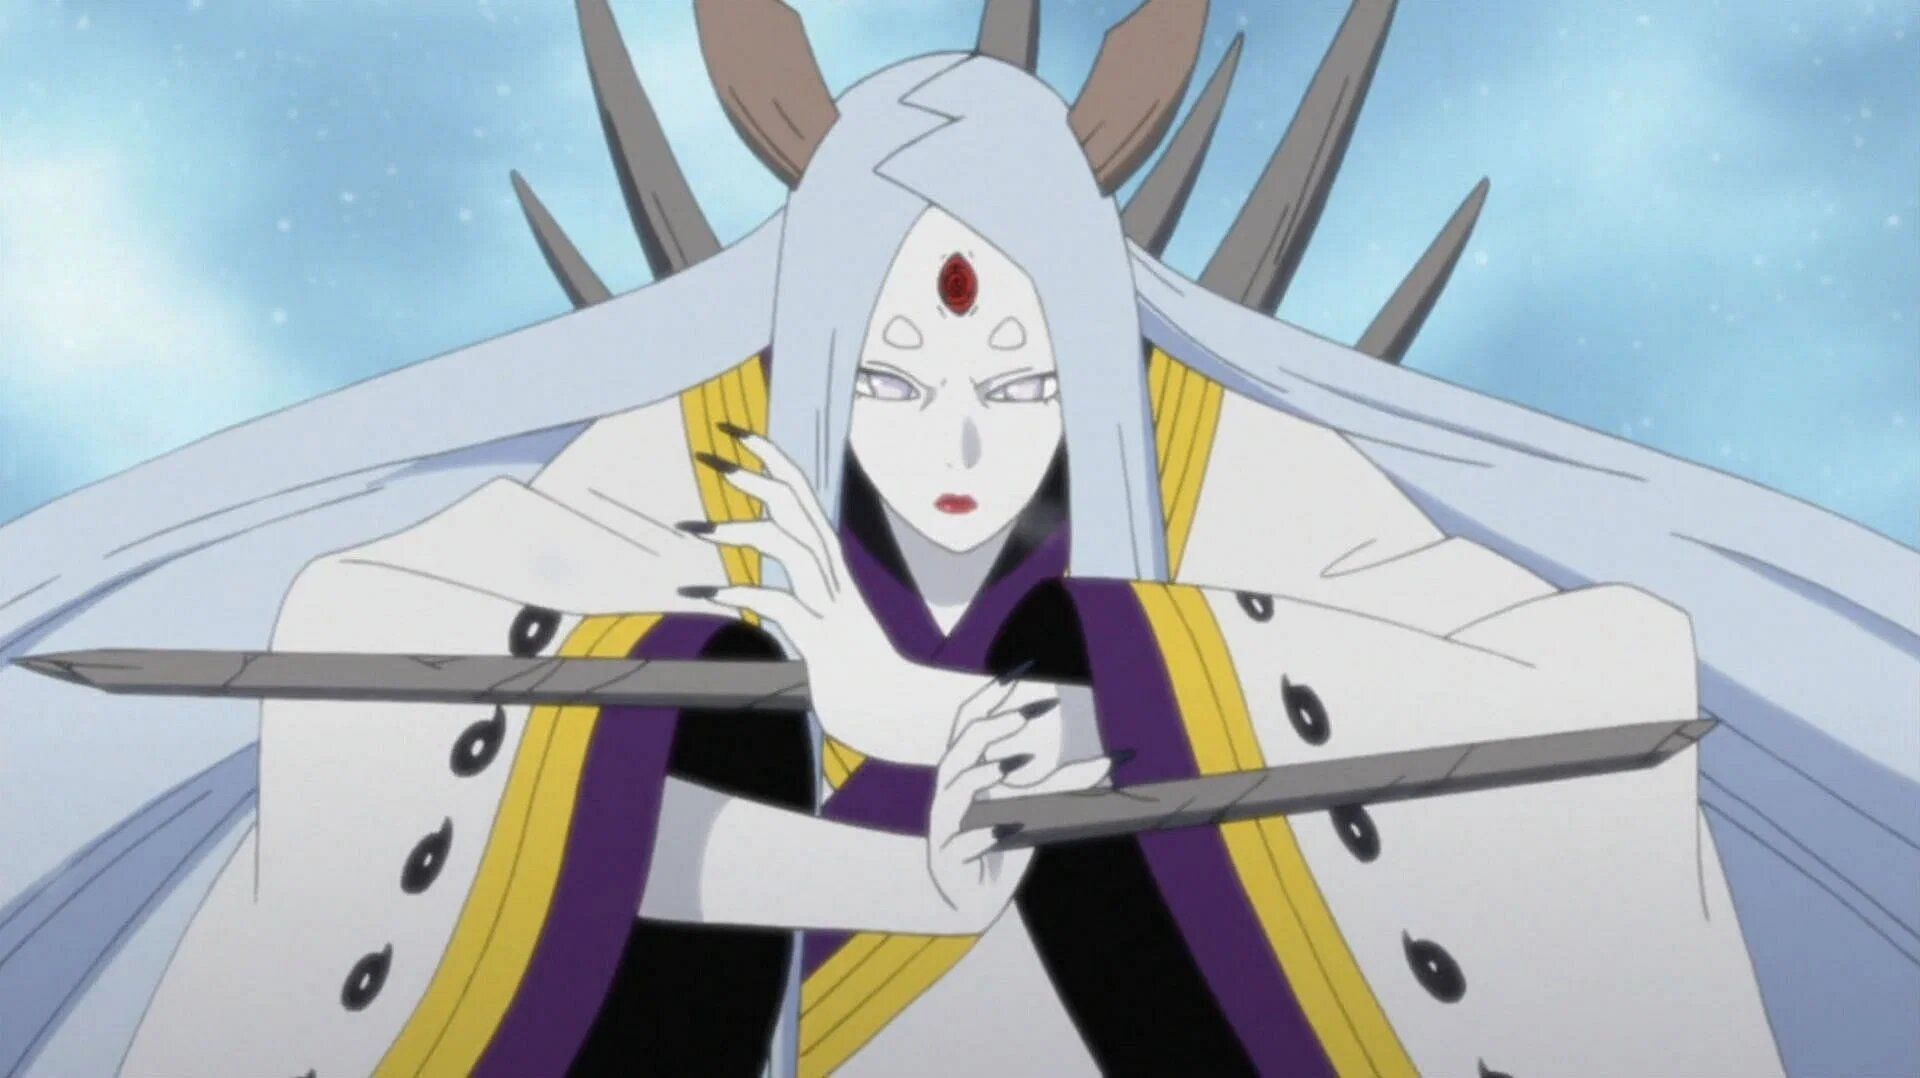 Arguably one of the most controversial anime villains of all time (Image via Studio Pierrot).